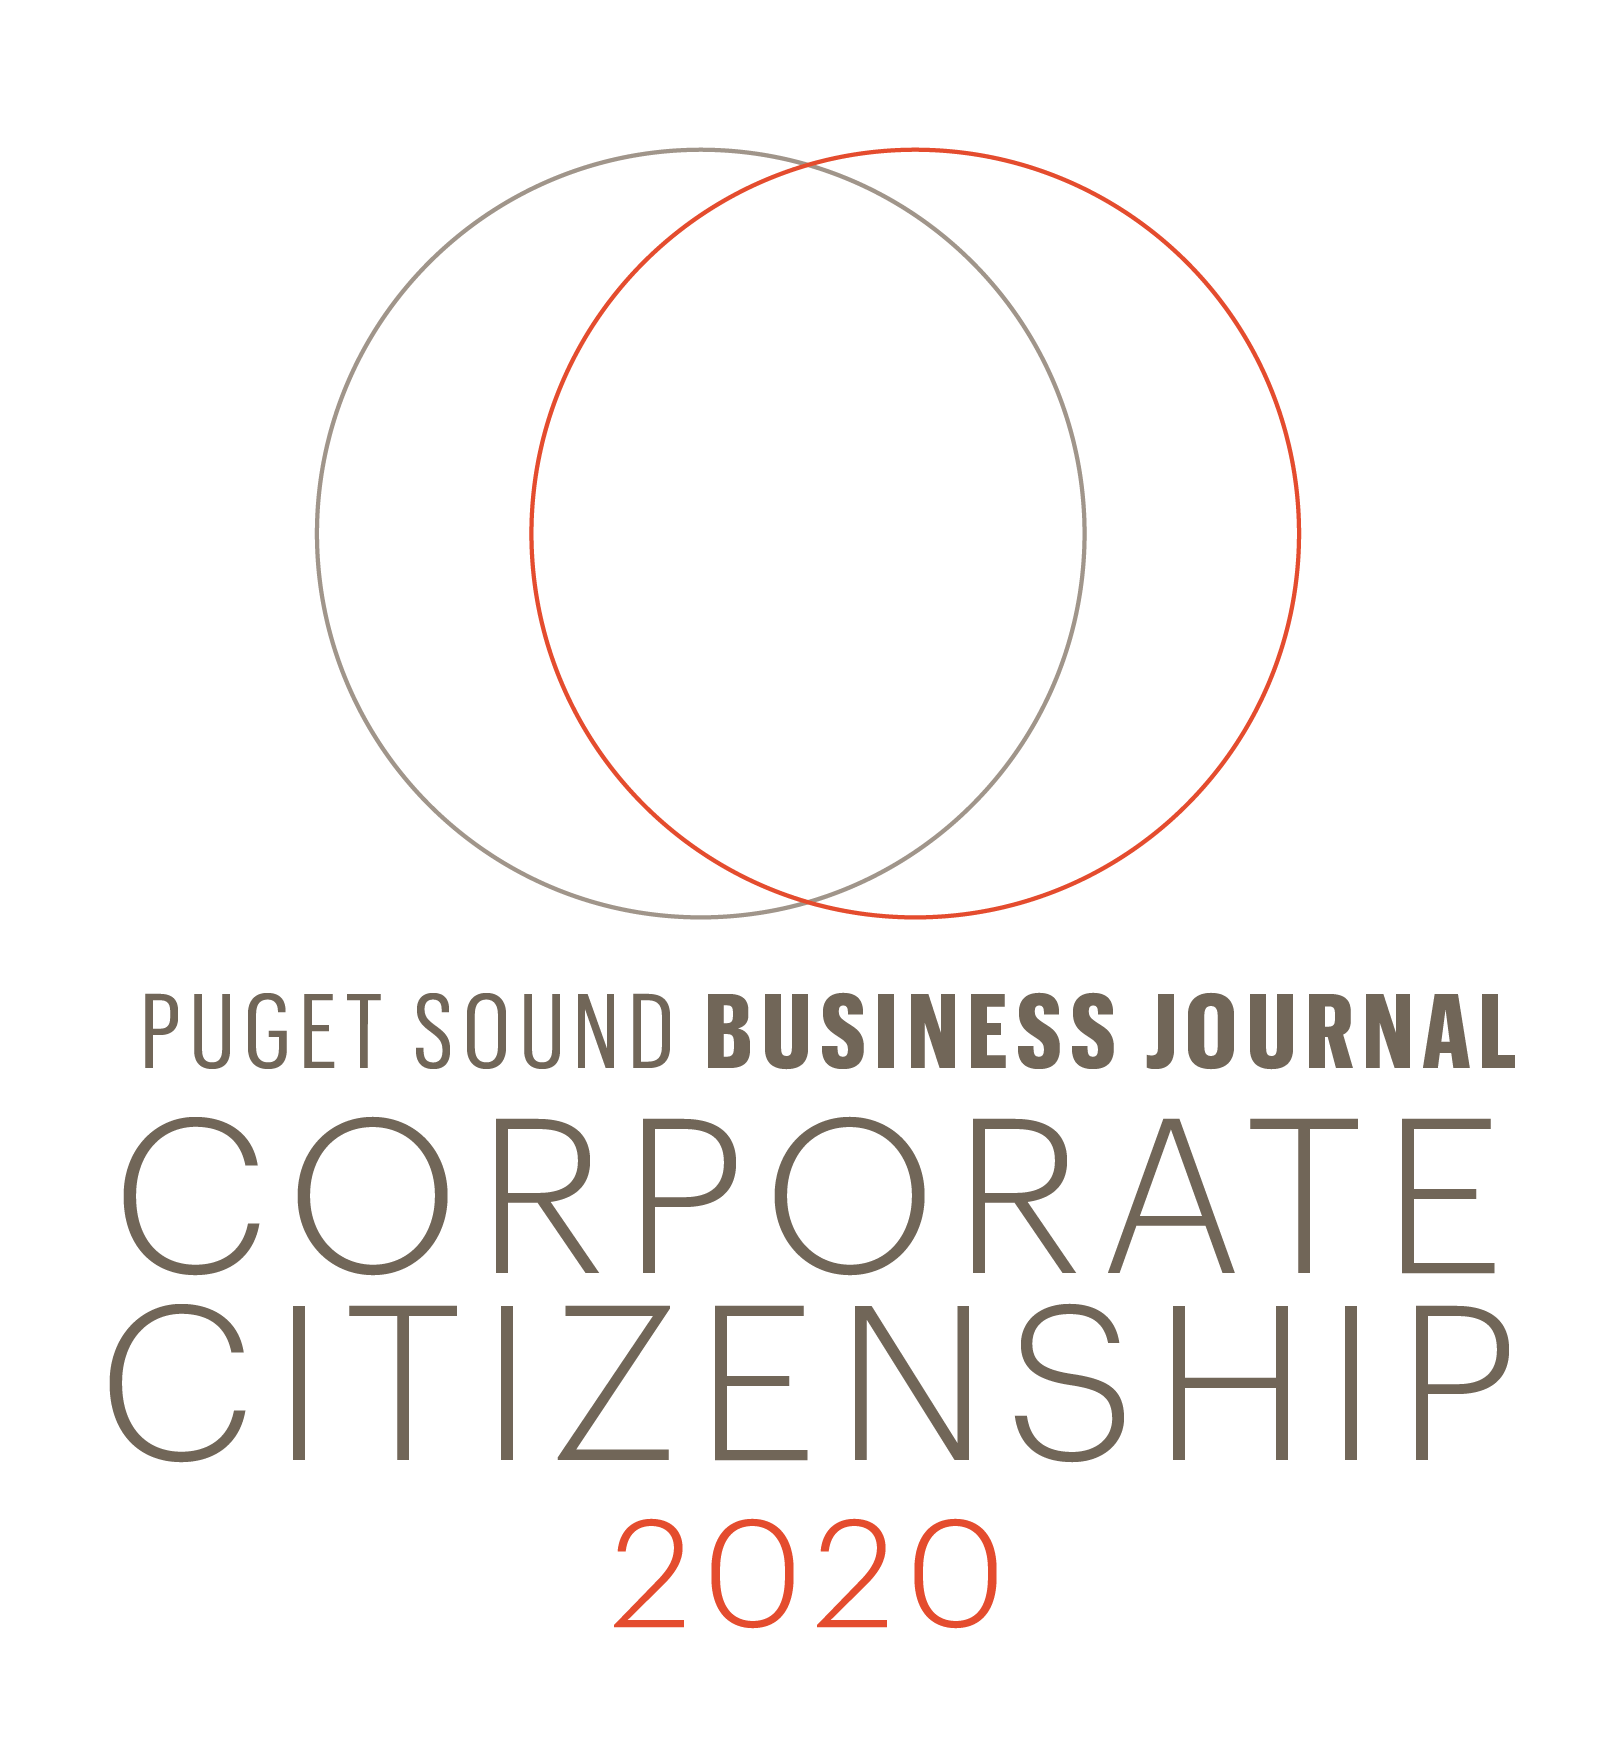 The Puget Sound Business Journal Corporate Citizenship logo for 2020